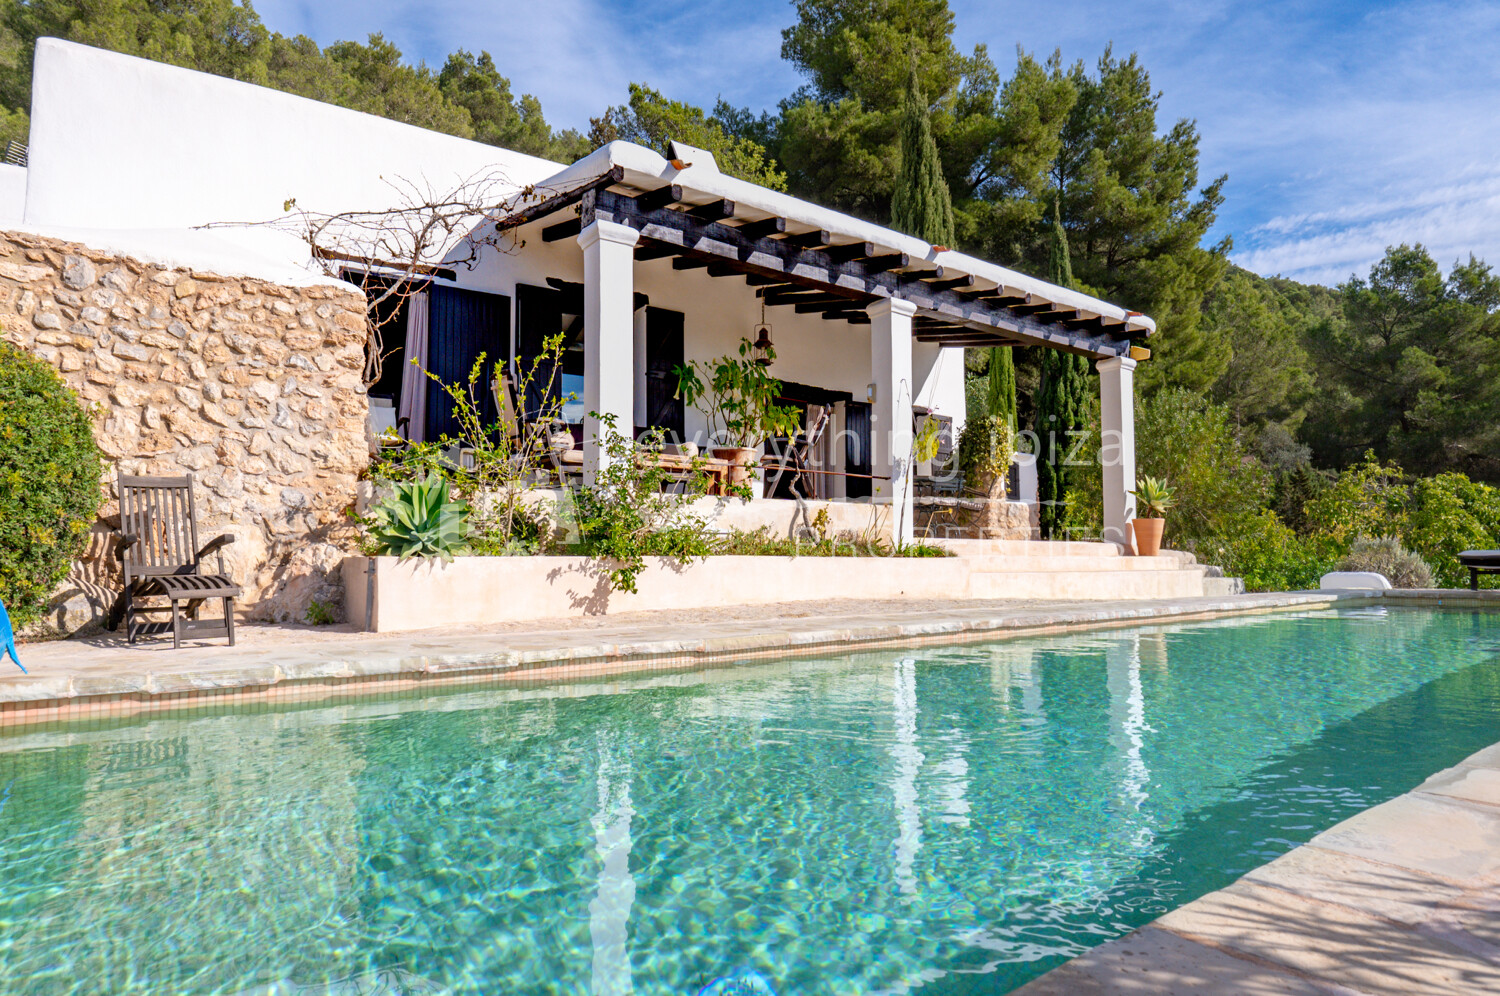 Elegant Hillside Finca with Stunning Views & Touristic License, ref. 1515, for sale in Ibiza by everything ibiza Properties